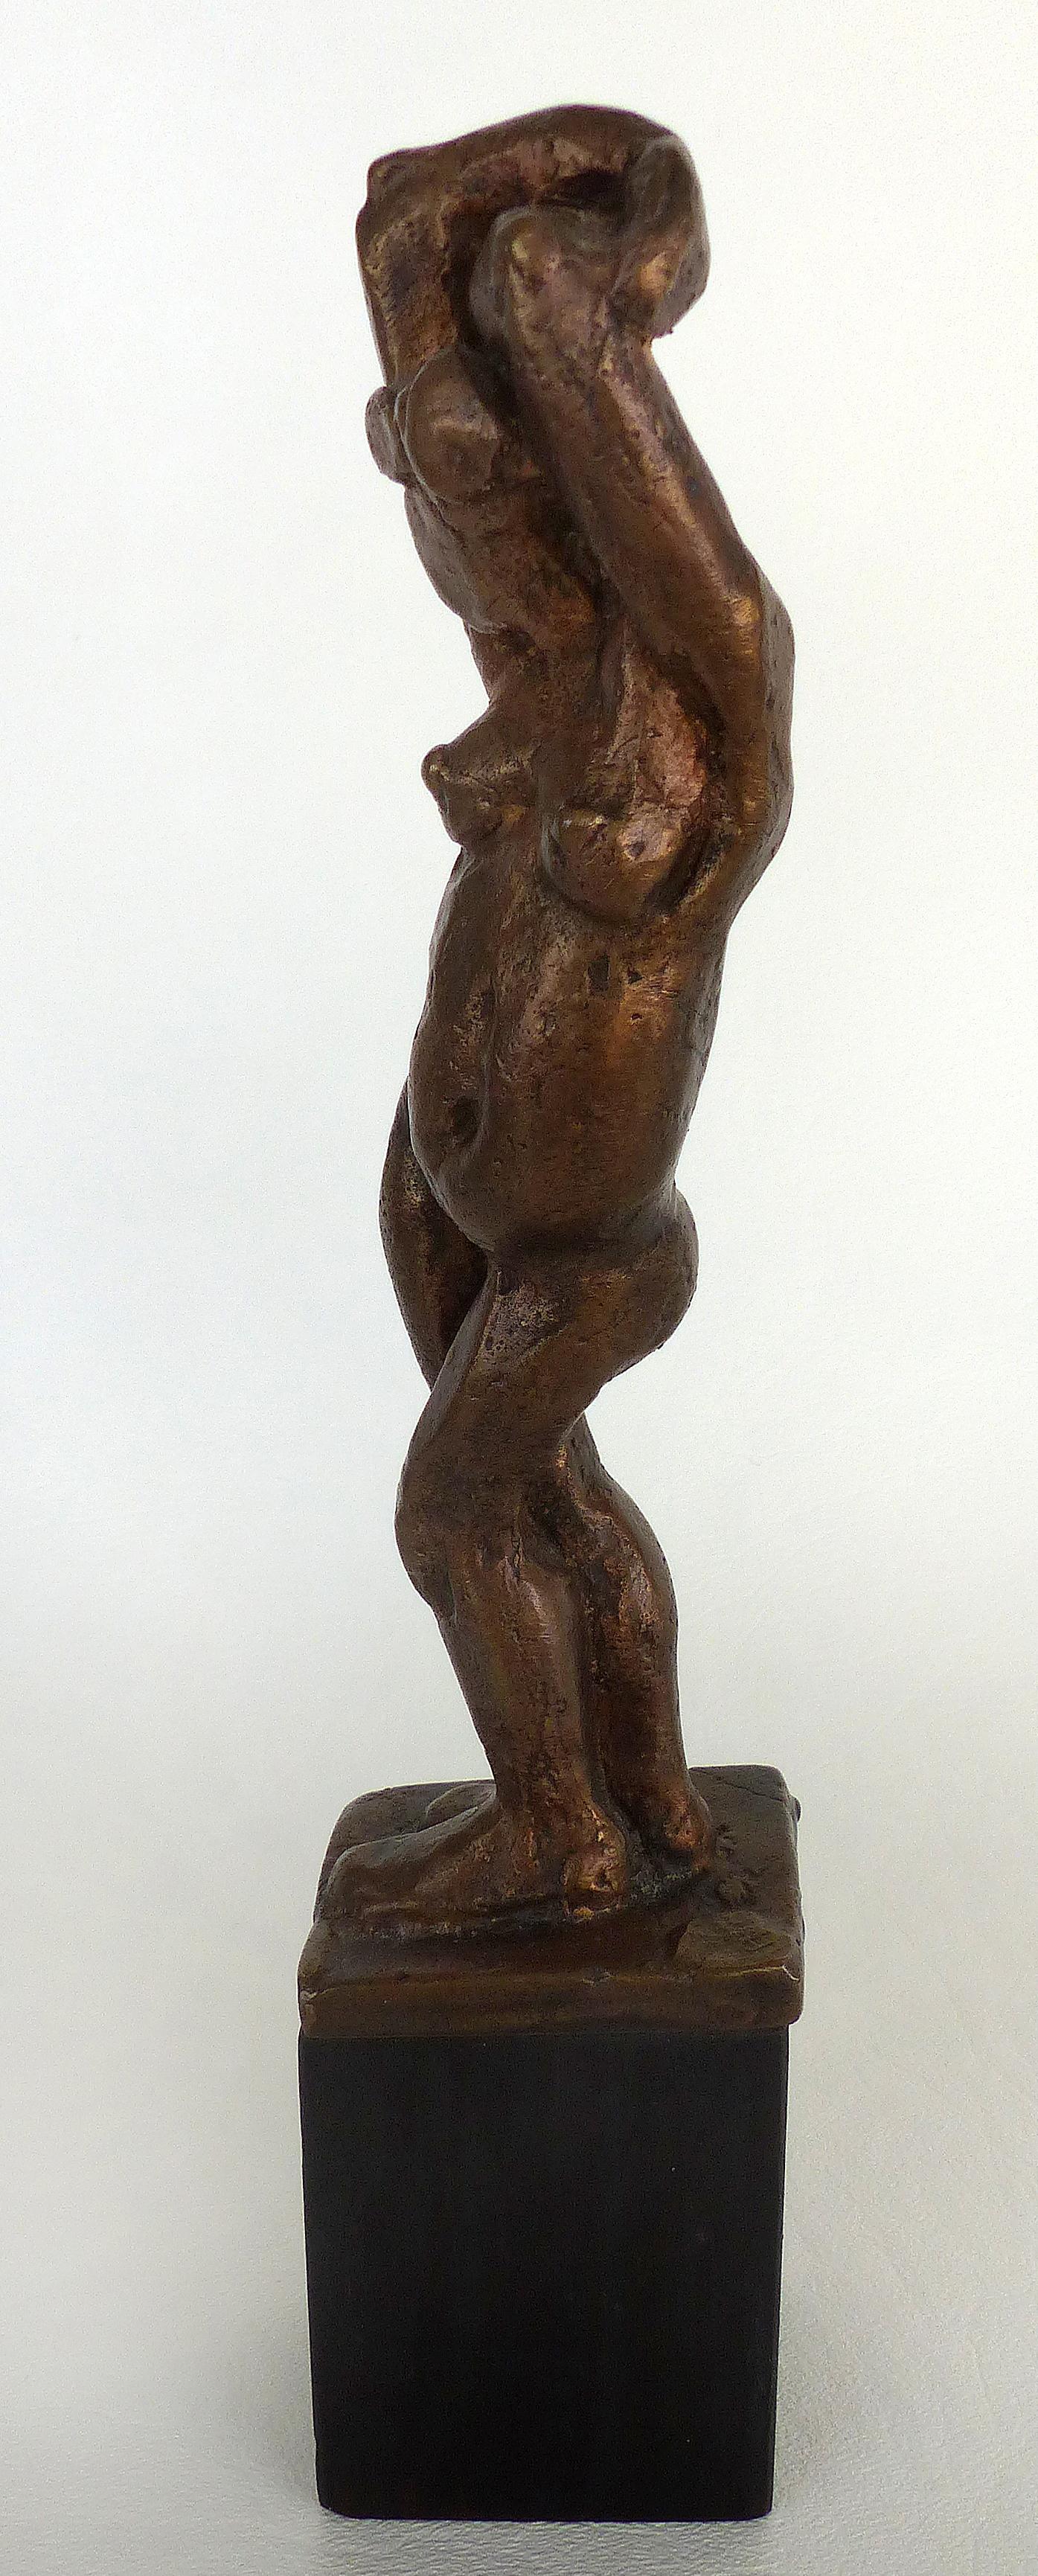 Natalie Charkow Hollander Bronze Nude Sculpture

Offered for sale is a figurative bronze standing nude sculpture raised on a wood base by Natalie Charkow Hollander signed and dated 1981. Signed to the base of the sculpture. Natalie Charkow Hollander